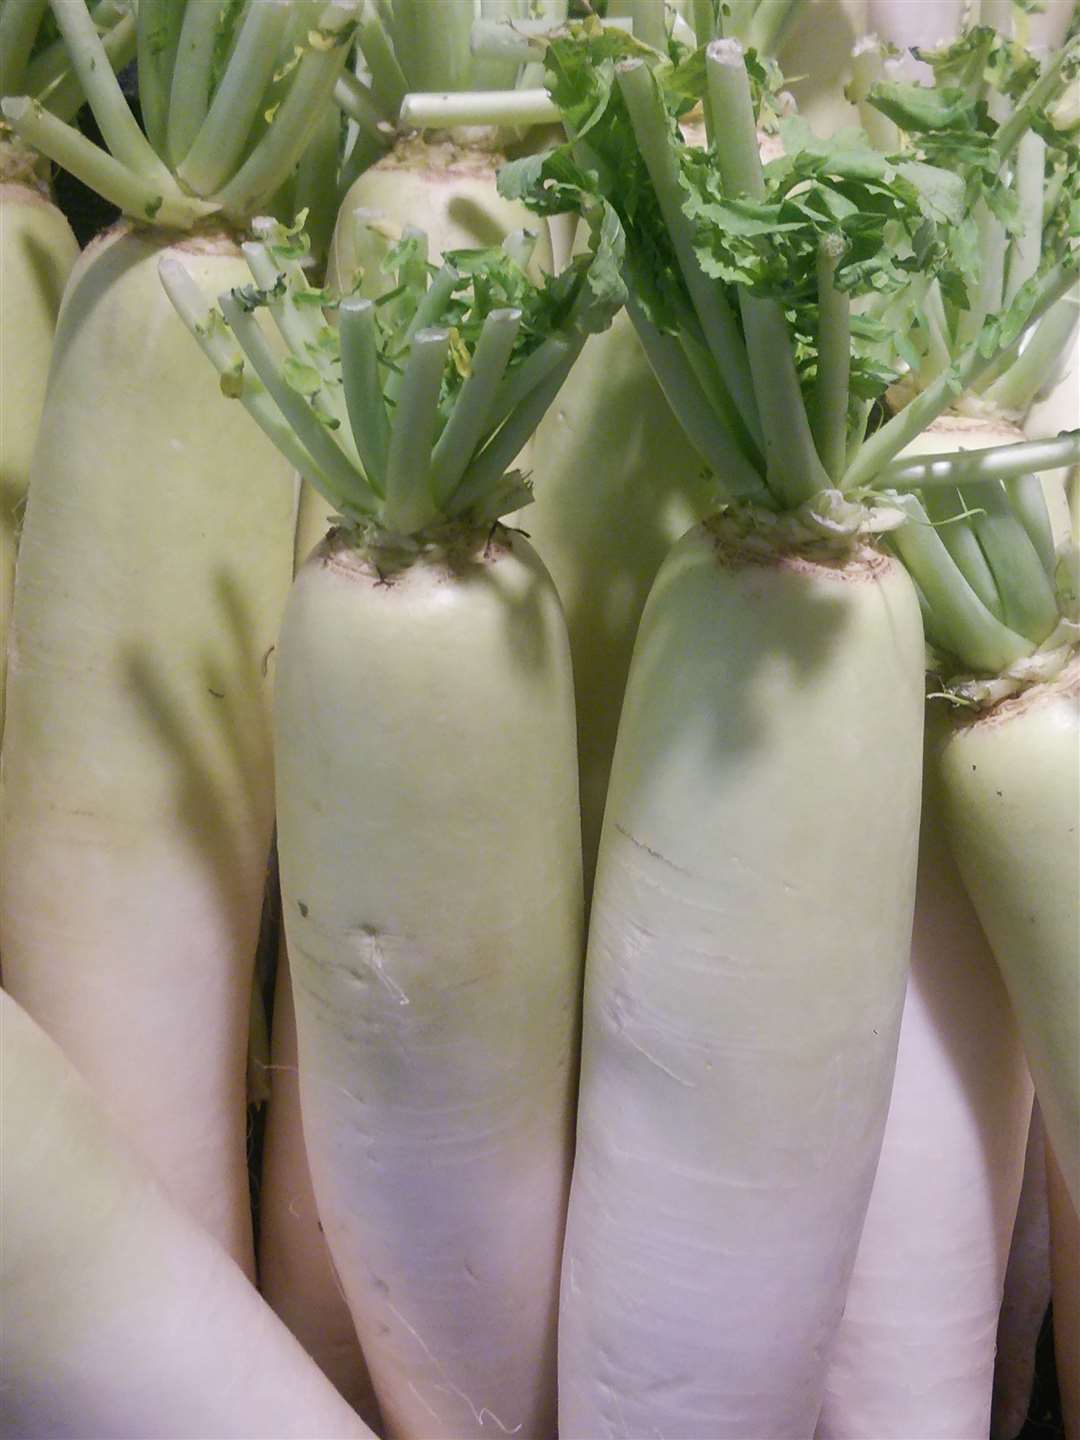 Japanese radish, mooli, are great in stir fries. Picture: iStock/PA